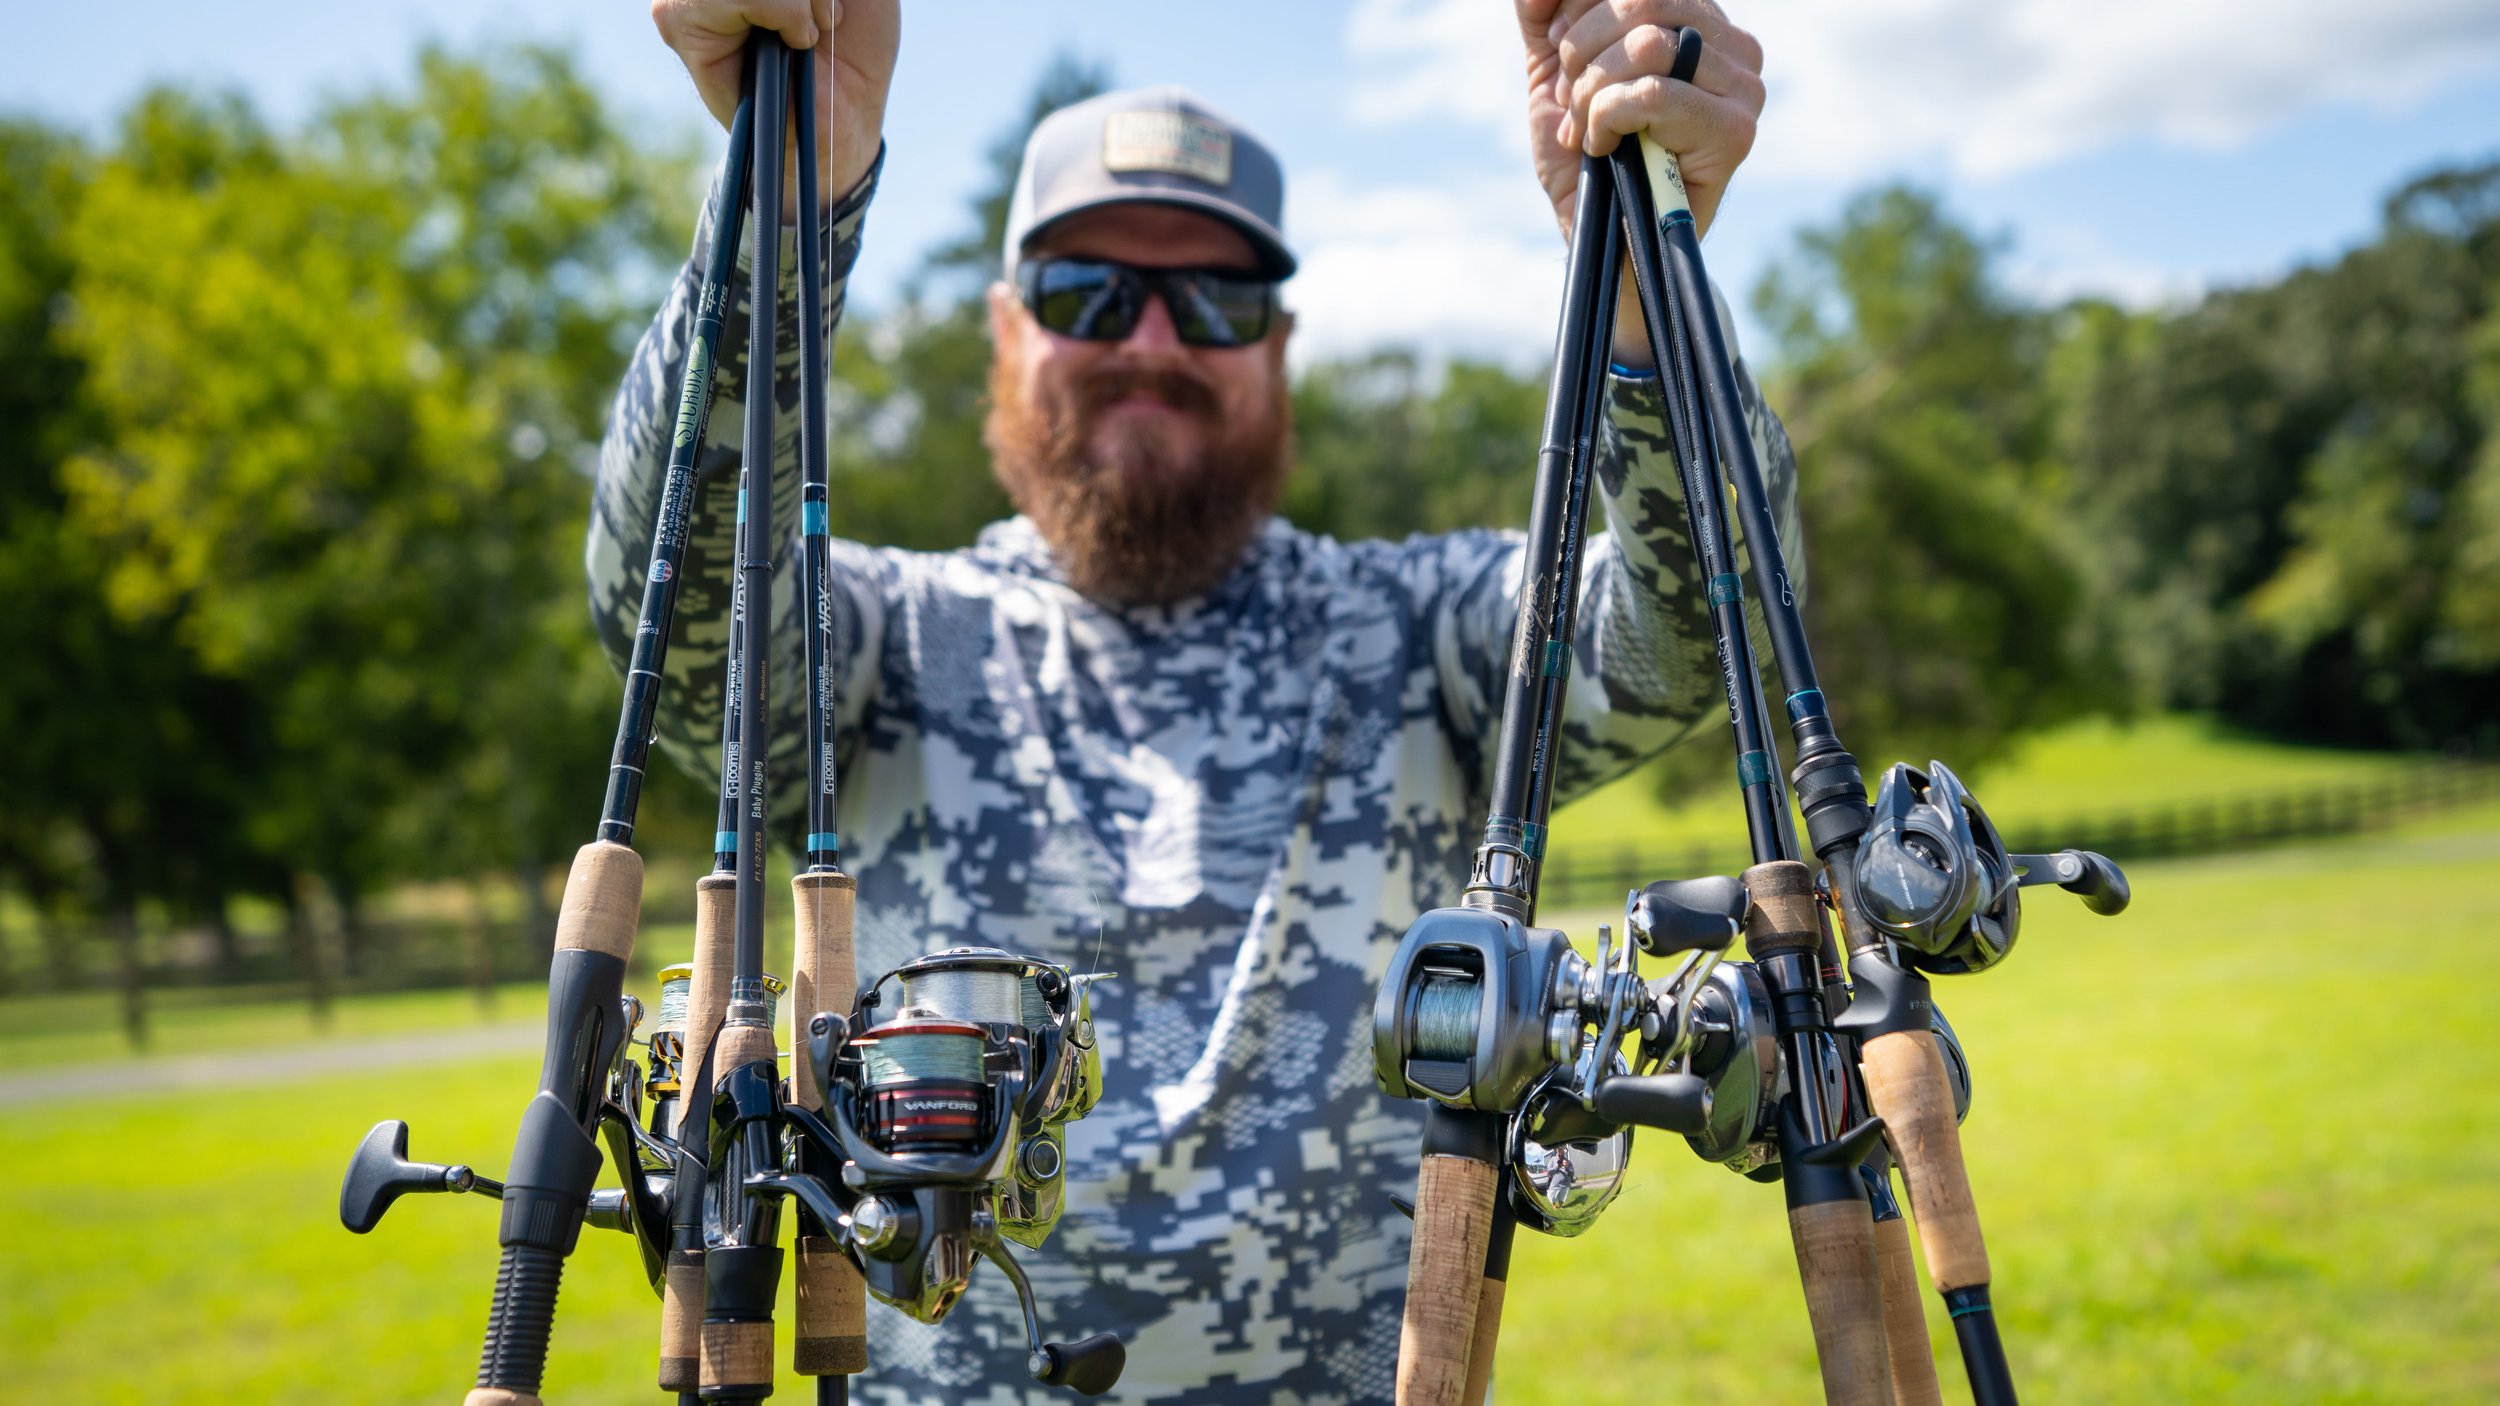 BUYER'S GUIDE: Best $400 Rod And Reel Combos! — Tactical Bassin